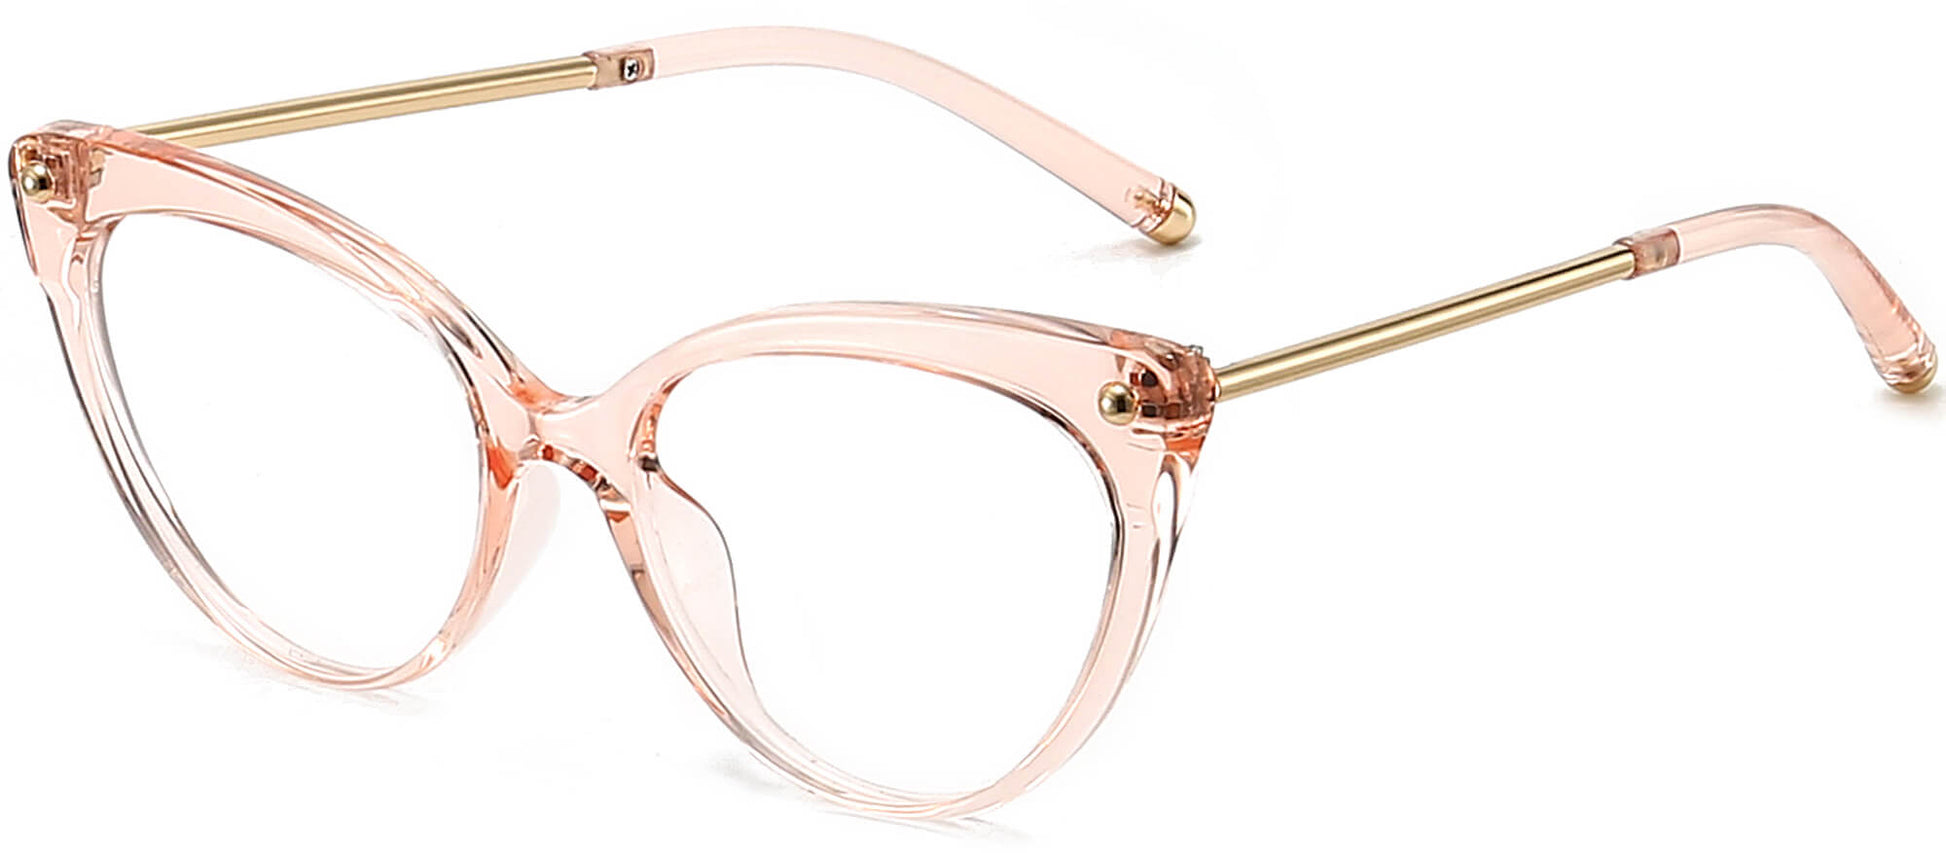 Leona Cateye Pink Eyeglasses from ANRRI, angle view